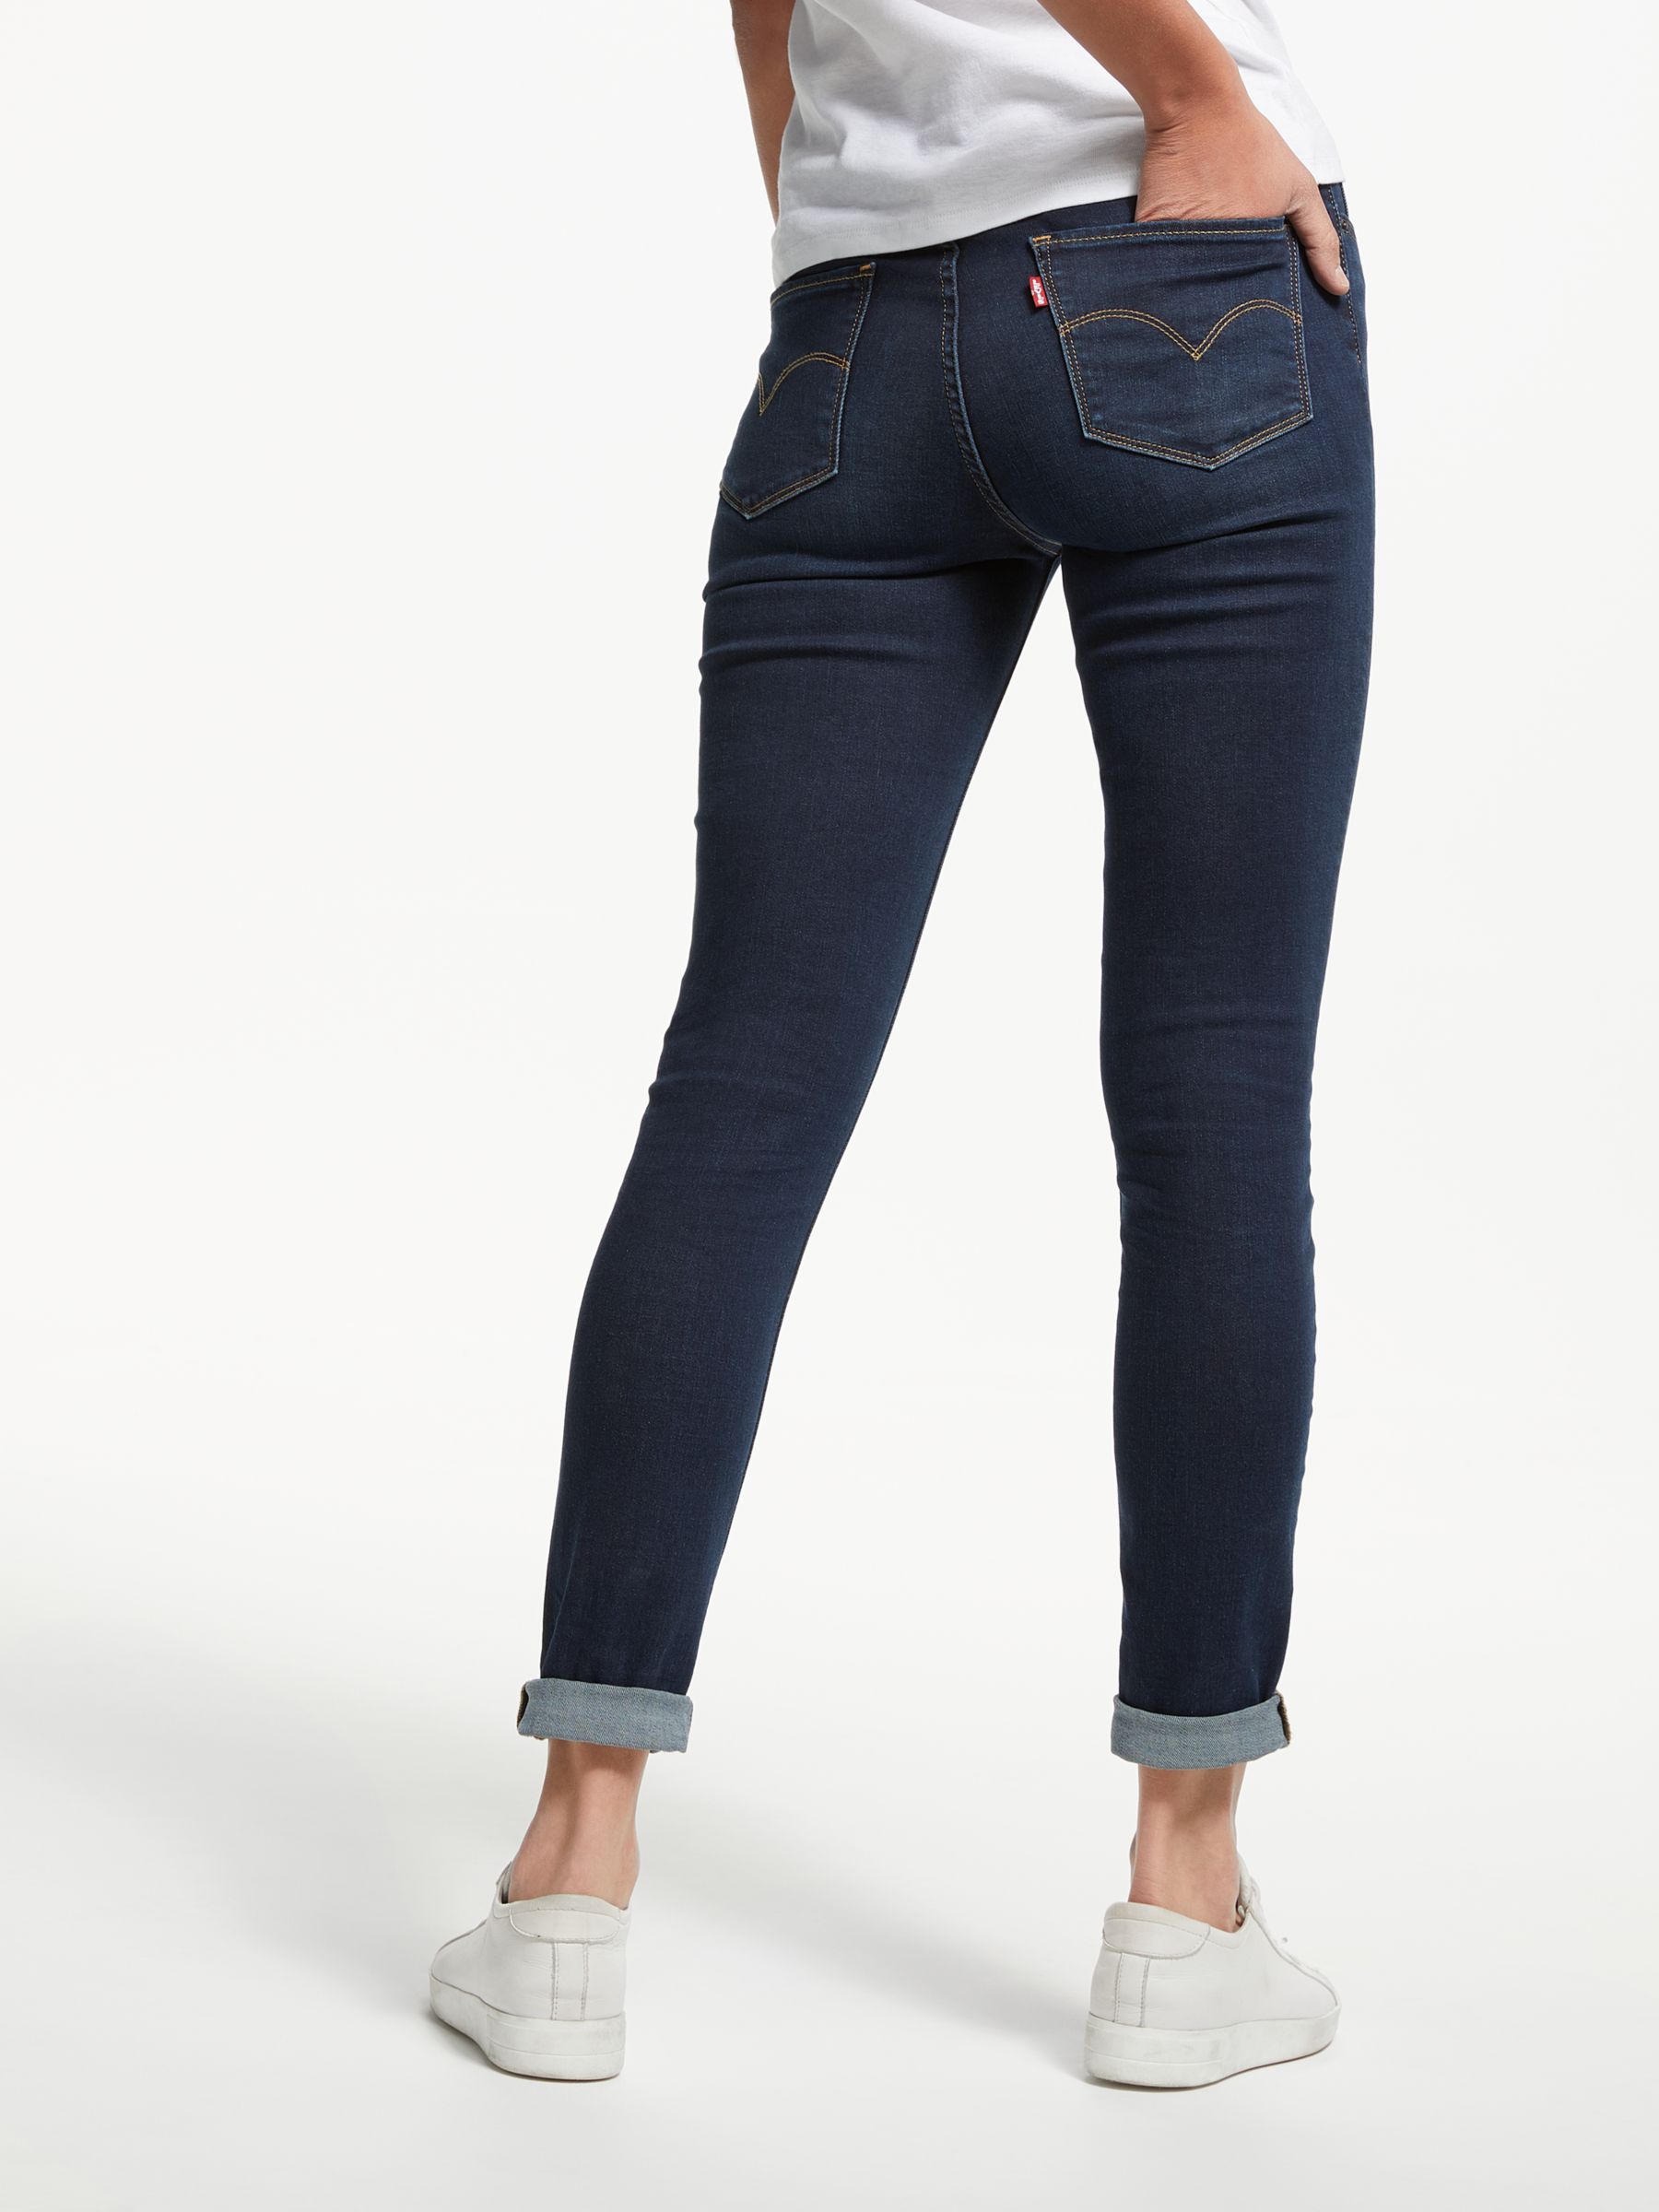 levi's 721 high rise skinny jeans